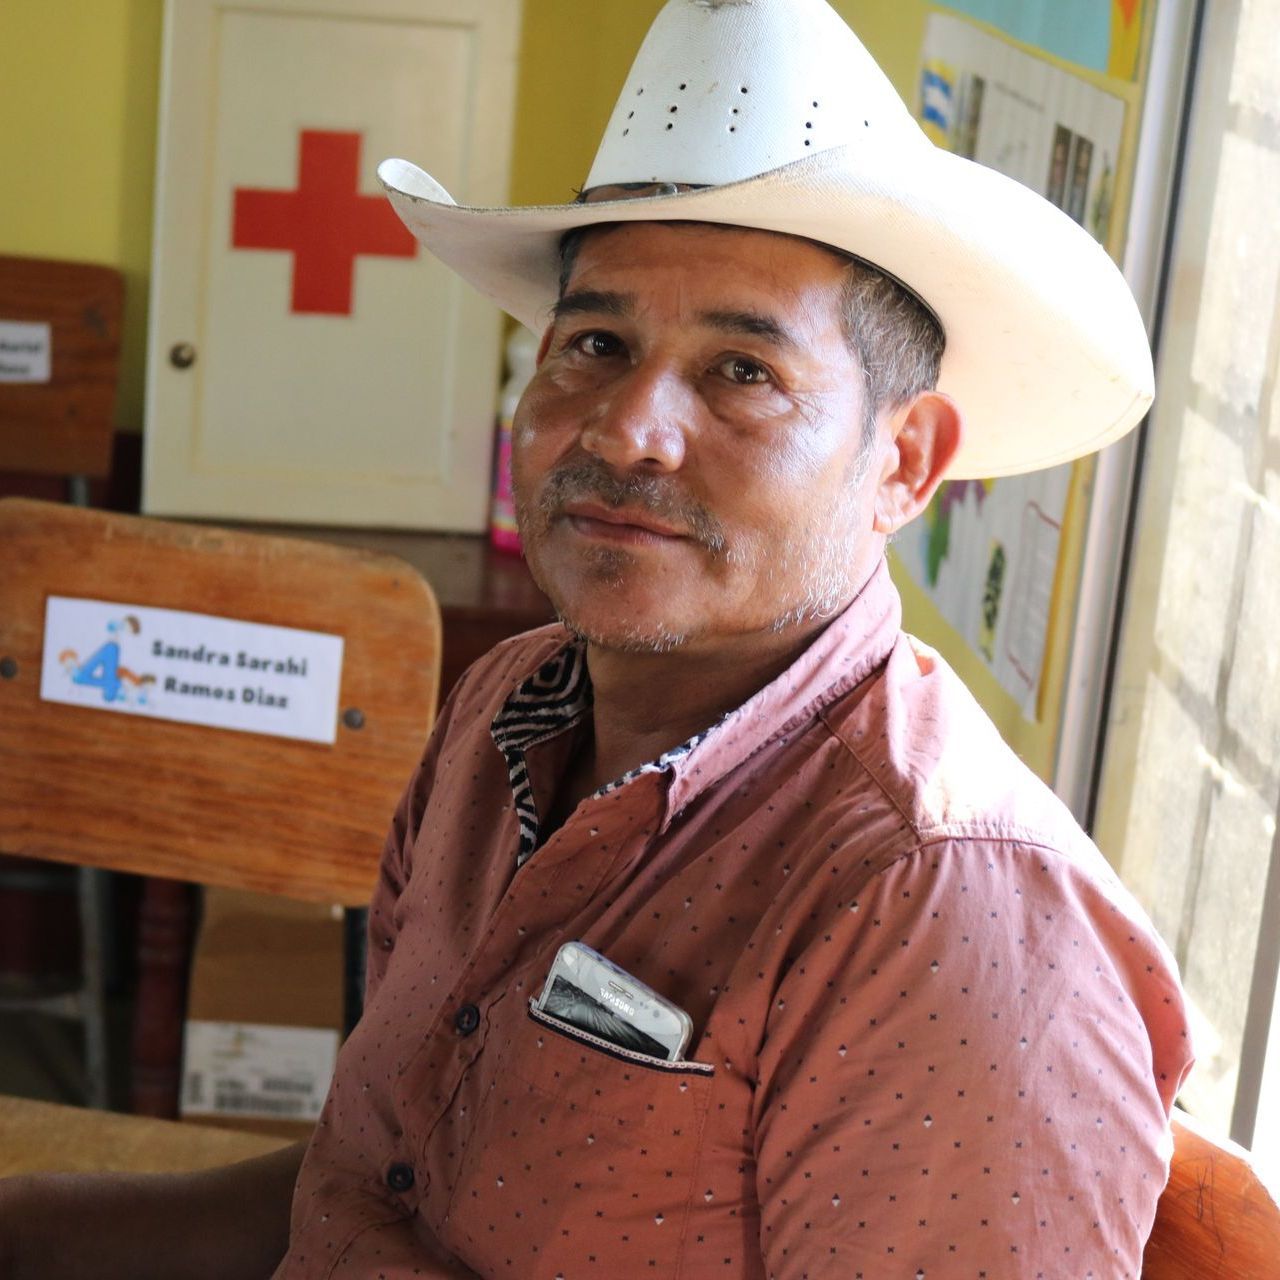 A team member in a cowboy hat gives a half-smile to the camera.